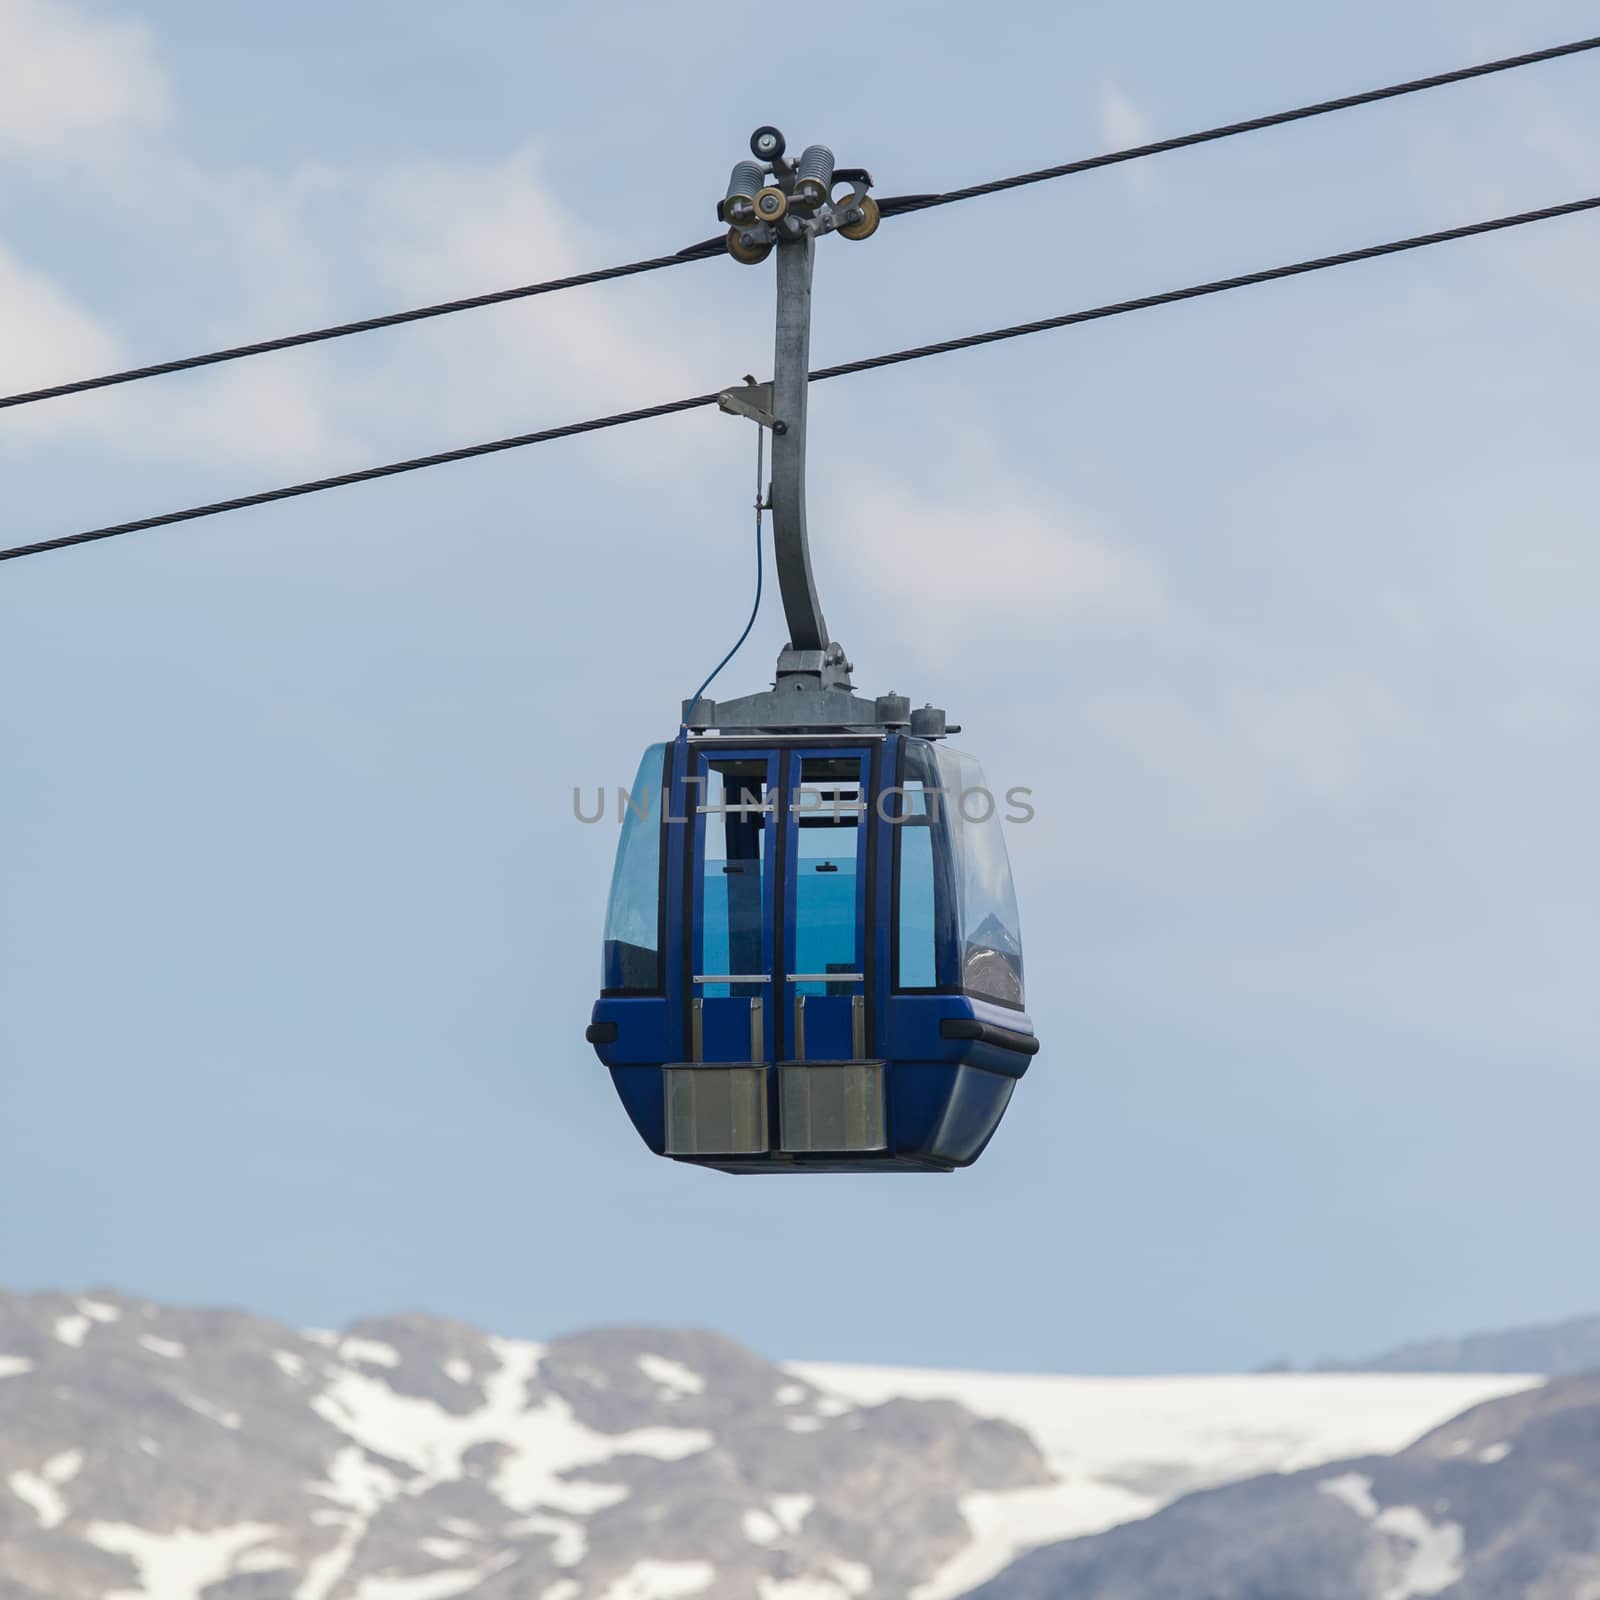 Ski lift cable booth or car by michaklootwijk